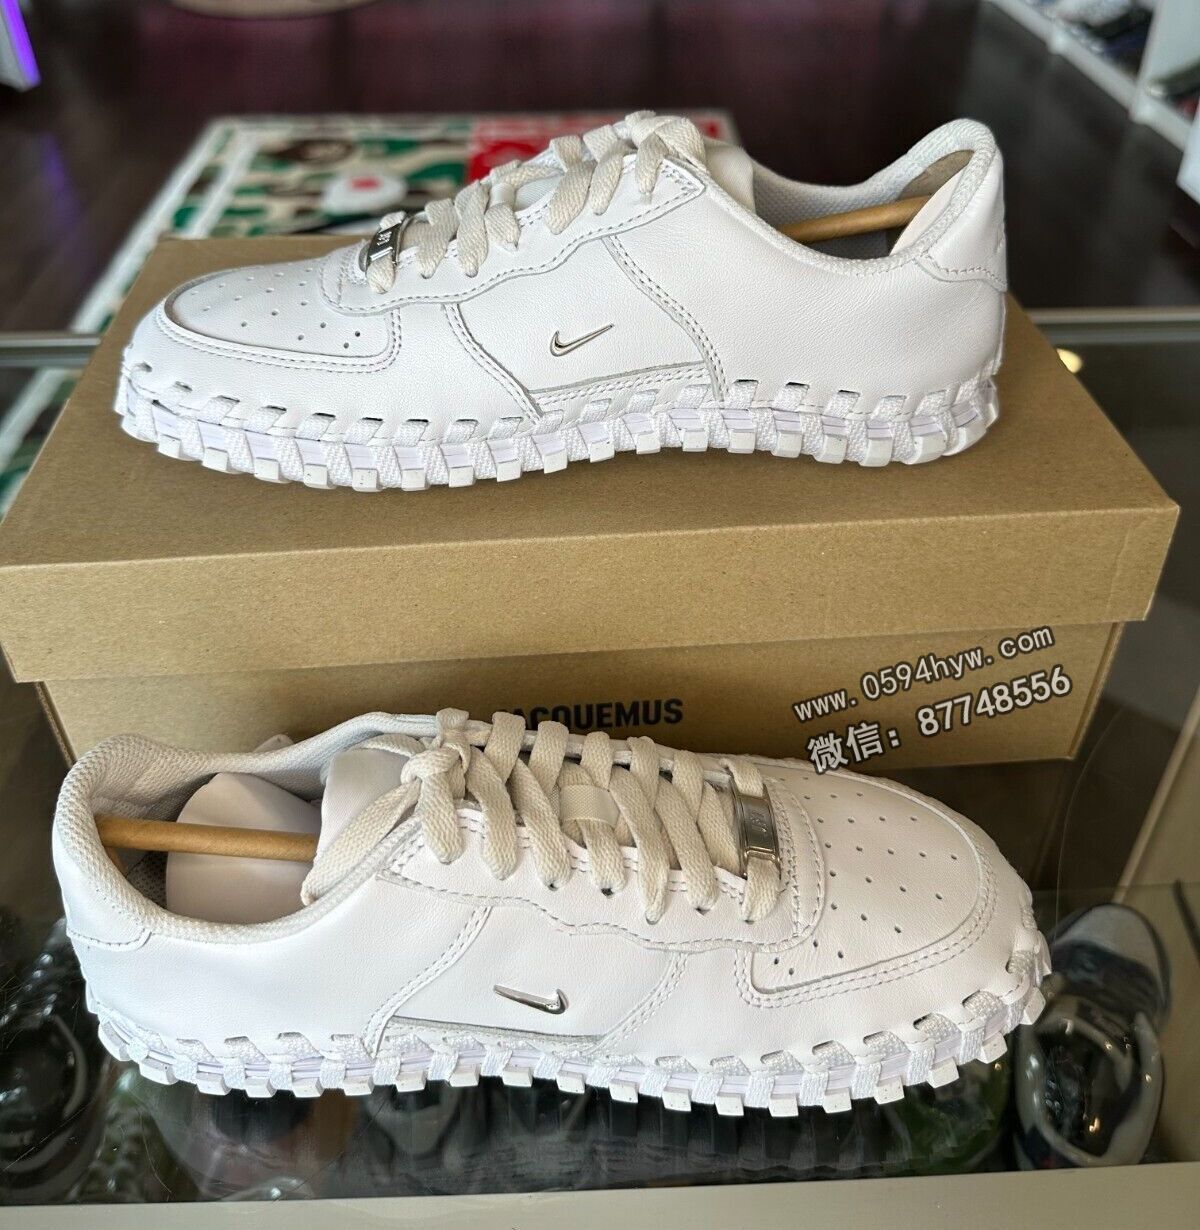 Jacquemus-Nike-J-Force-1-Low-White-Woven-DR0424-100-3-1